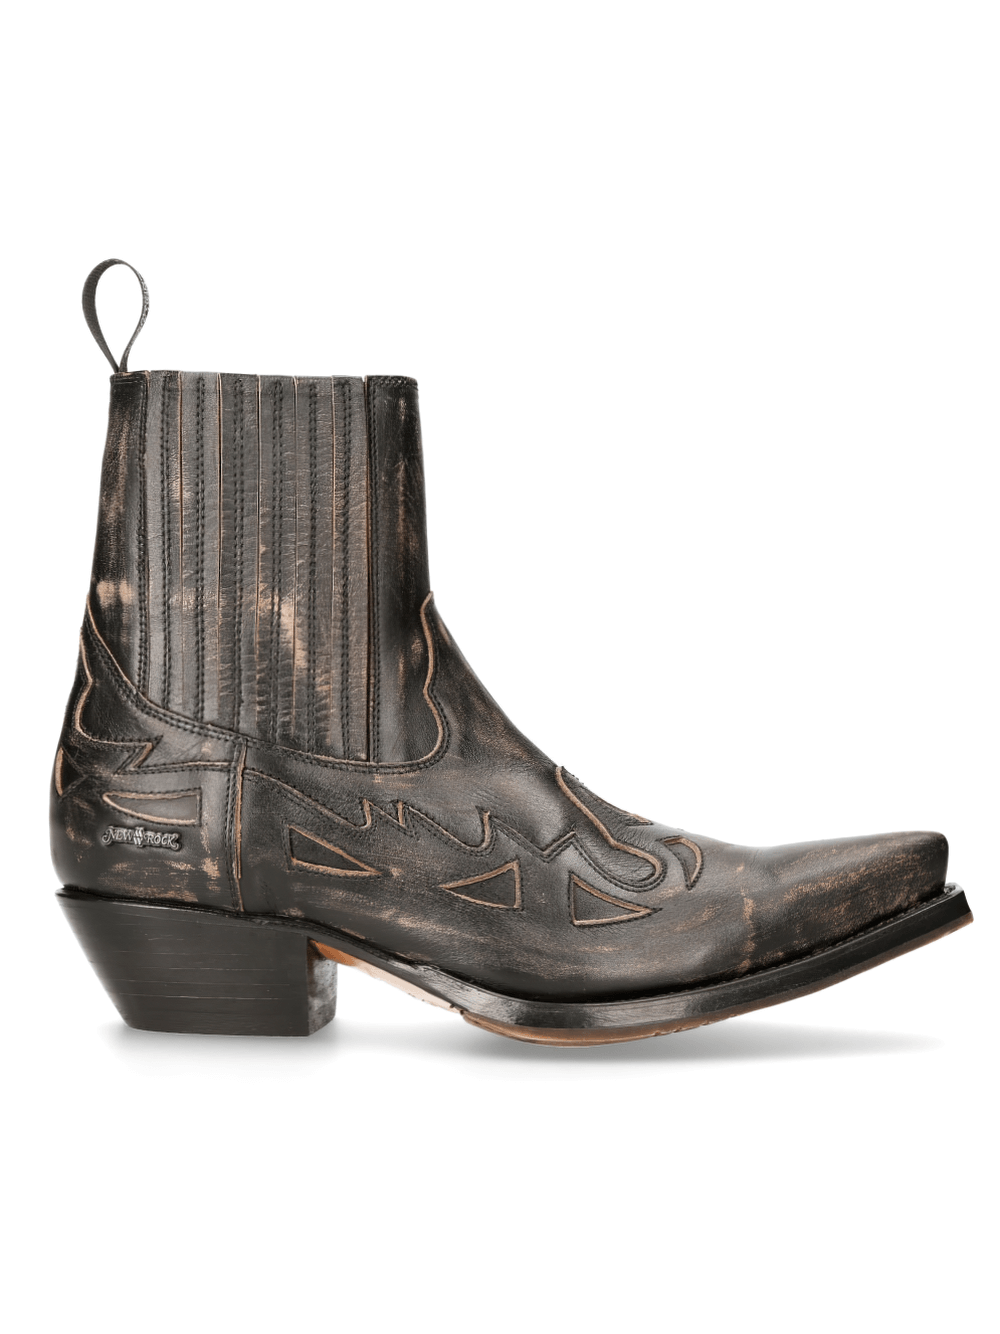 NEW ROCK Zipped Western Ankle Boots with Embossed Detail